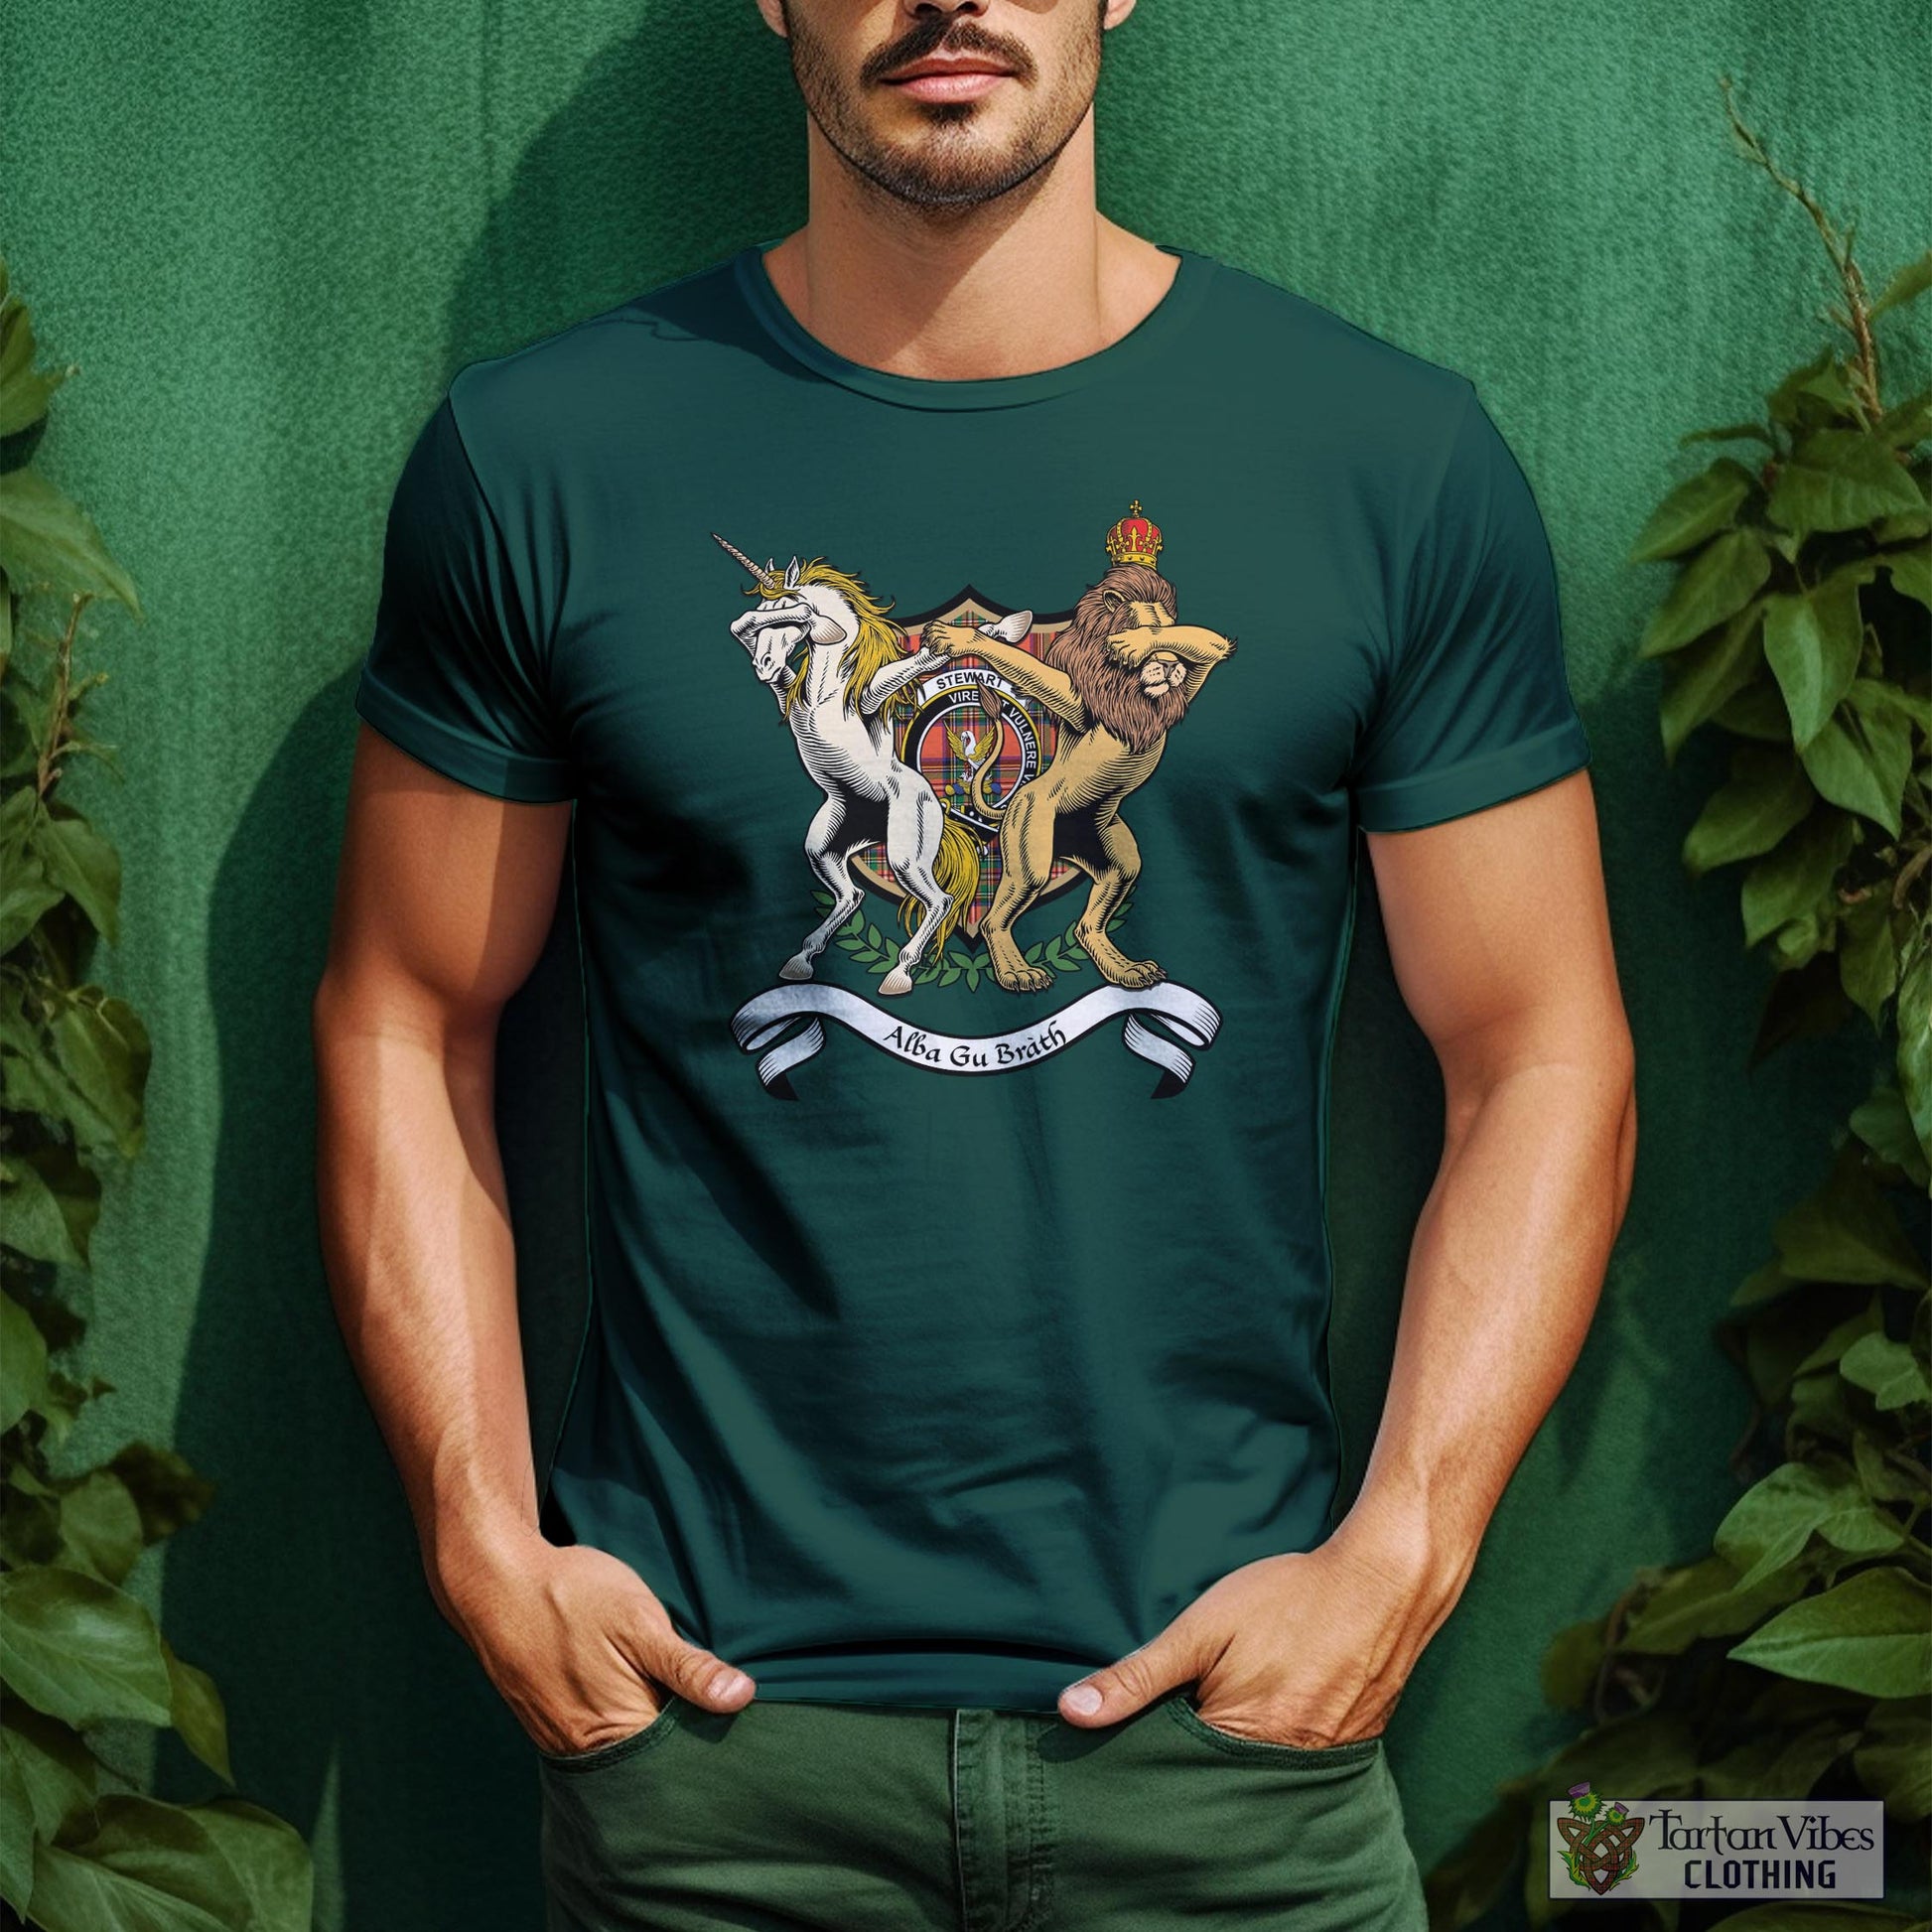 Tartan Vibes Clothing Stewart Royal Ancient Family Crest Cotton Men's T-Shirt with Scotland Royal Coat Of Arm Funny Style